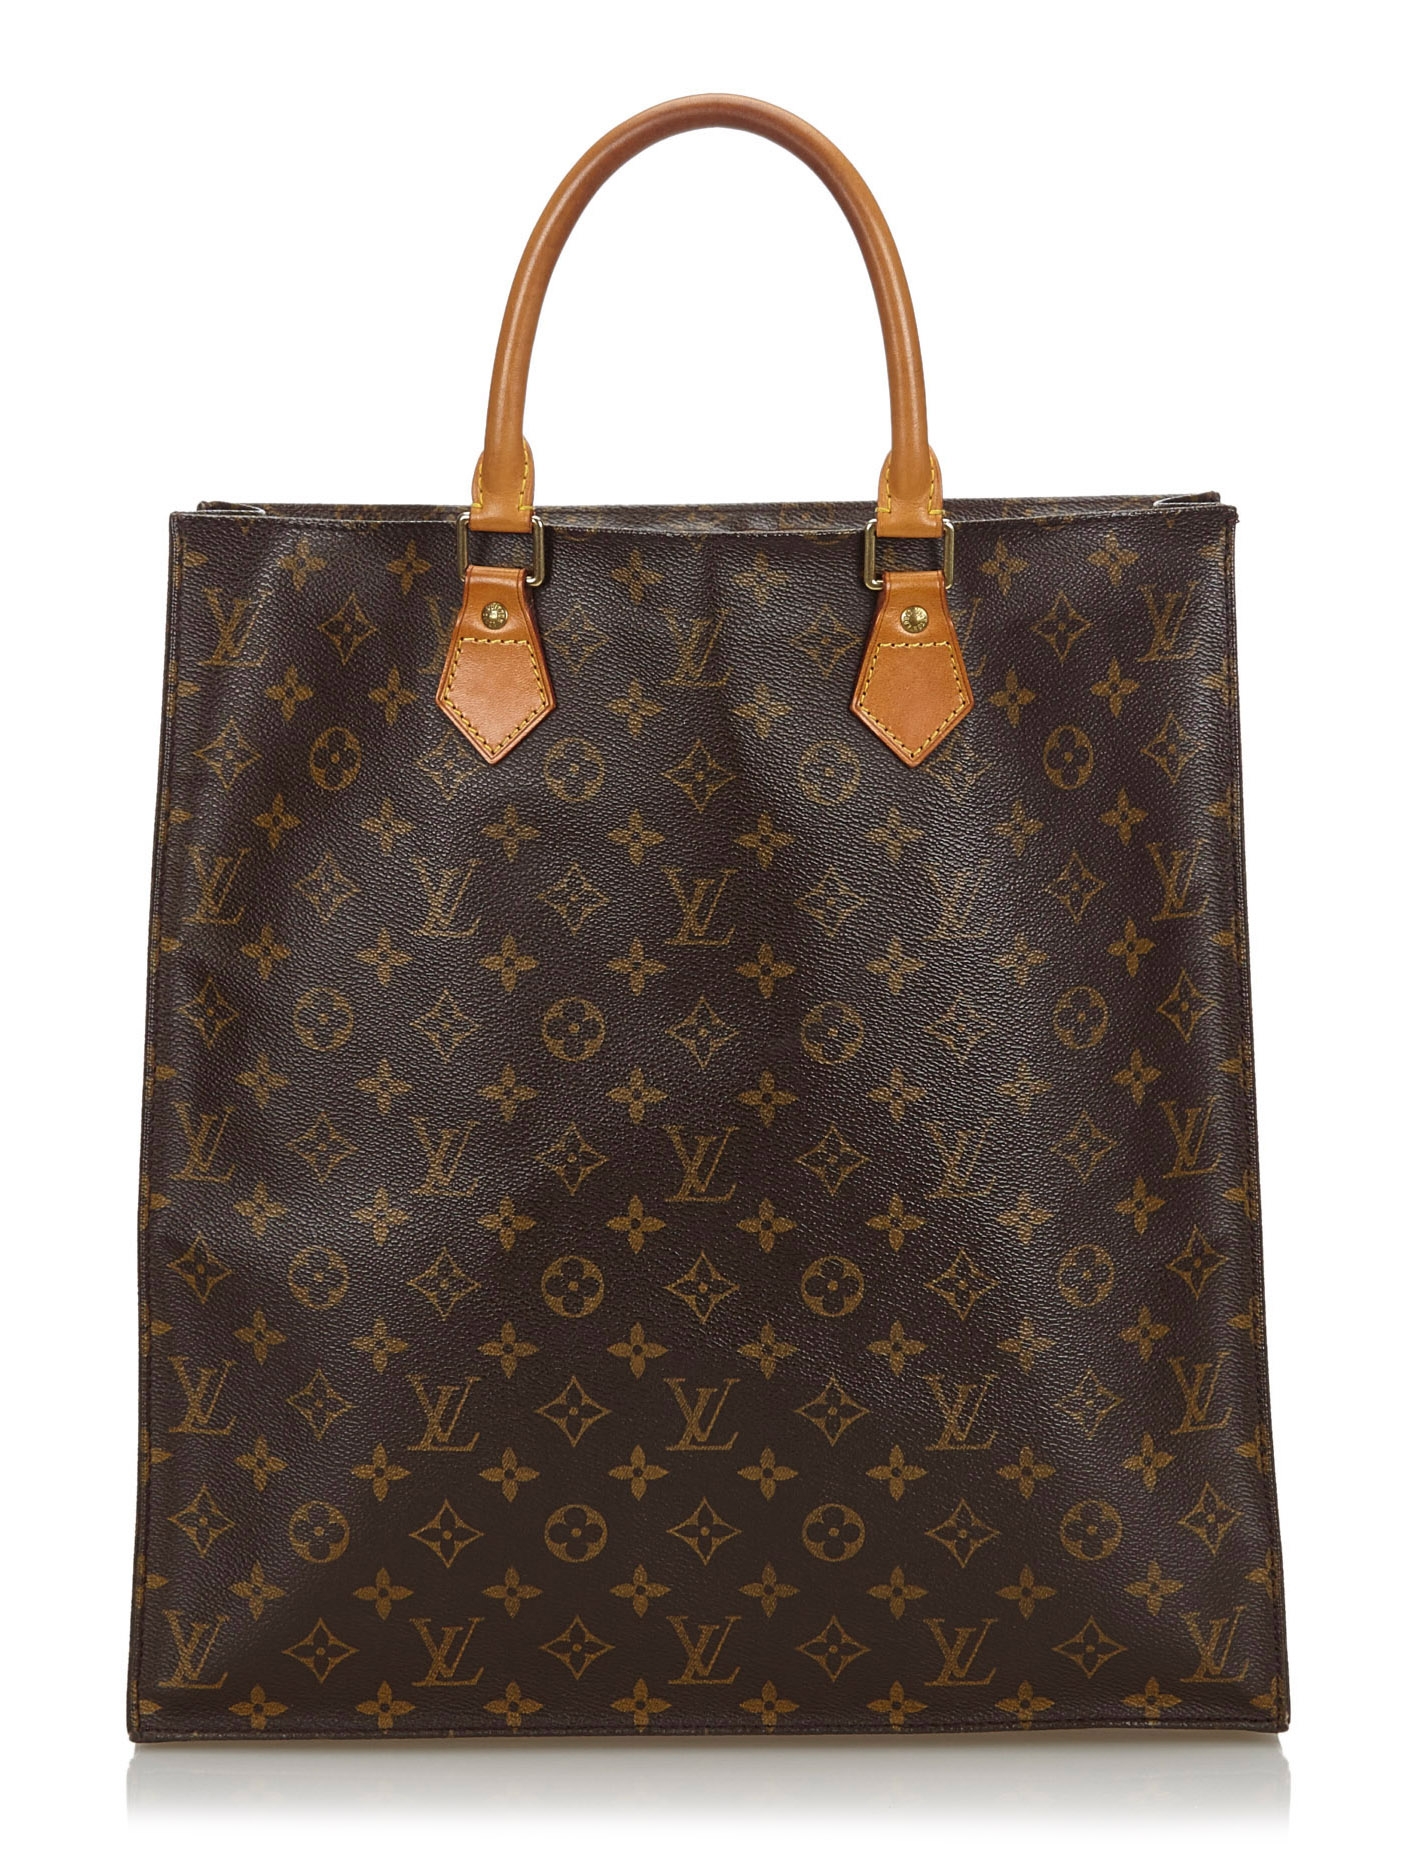 Louis Vuitton Sac Plat Shopping Bag and Brown Leather